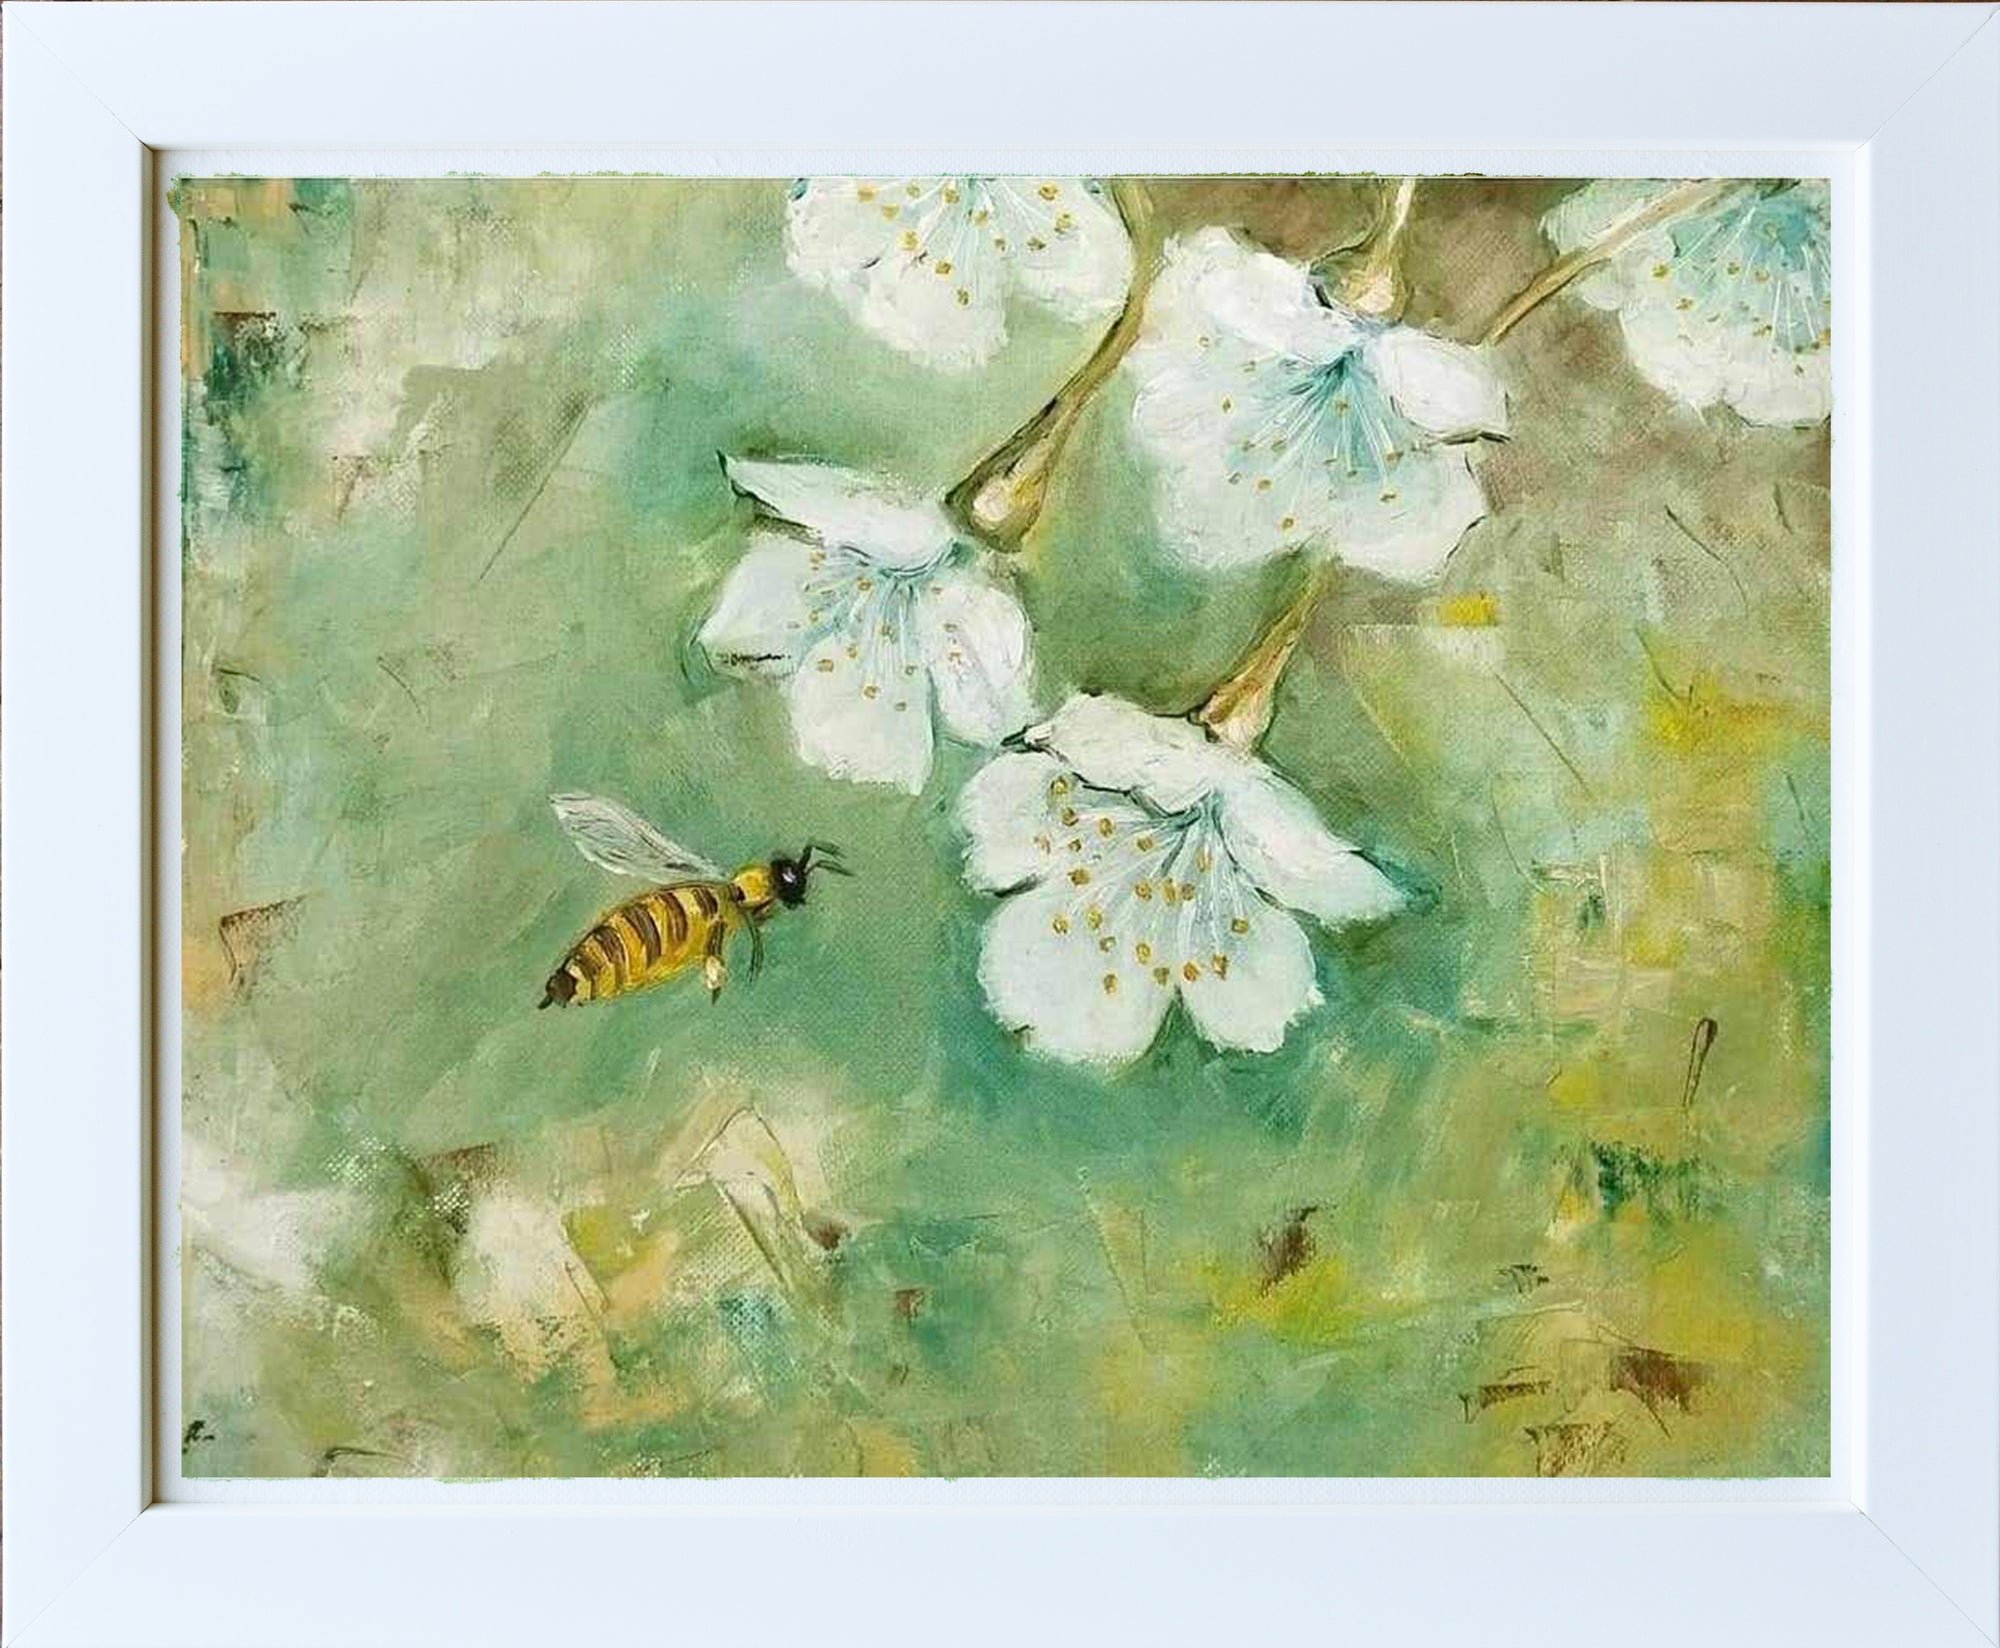 This is a painting of springtime and it's arrived in my garden, the bees were buzzing and pollinating the blossom. Such a beautiful sight to see by Australian Artist Jenni Rogers